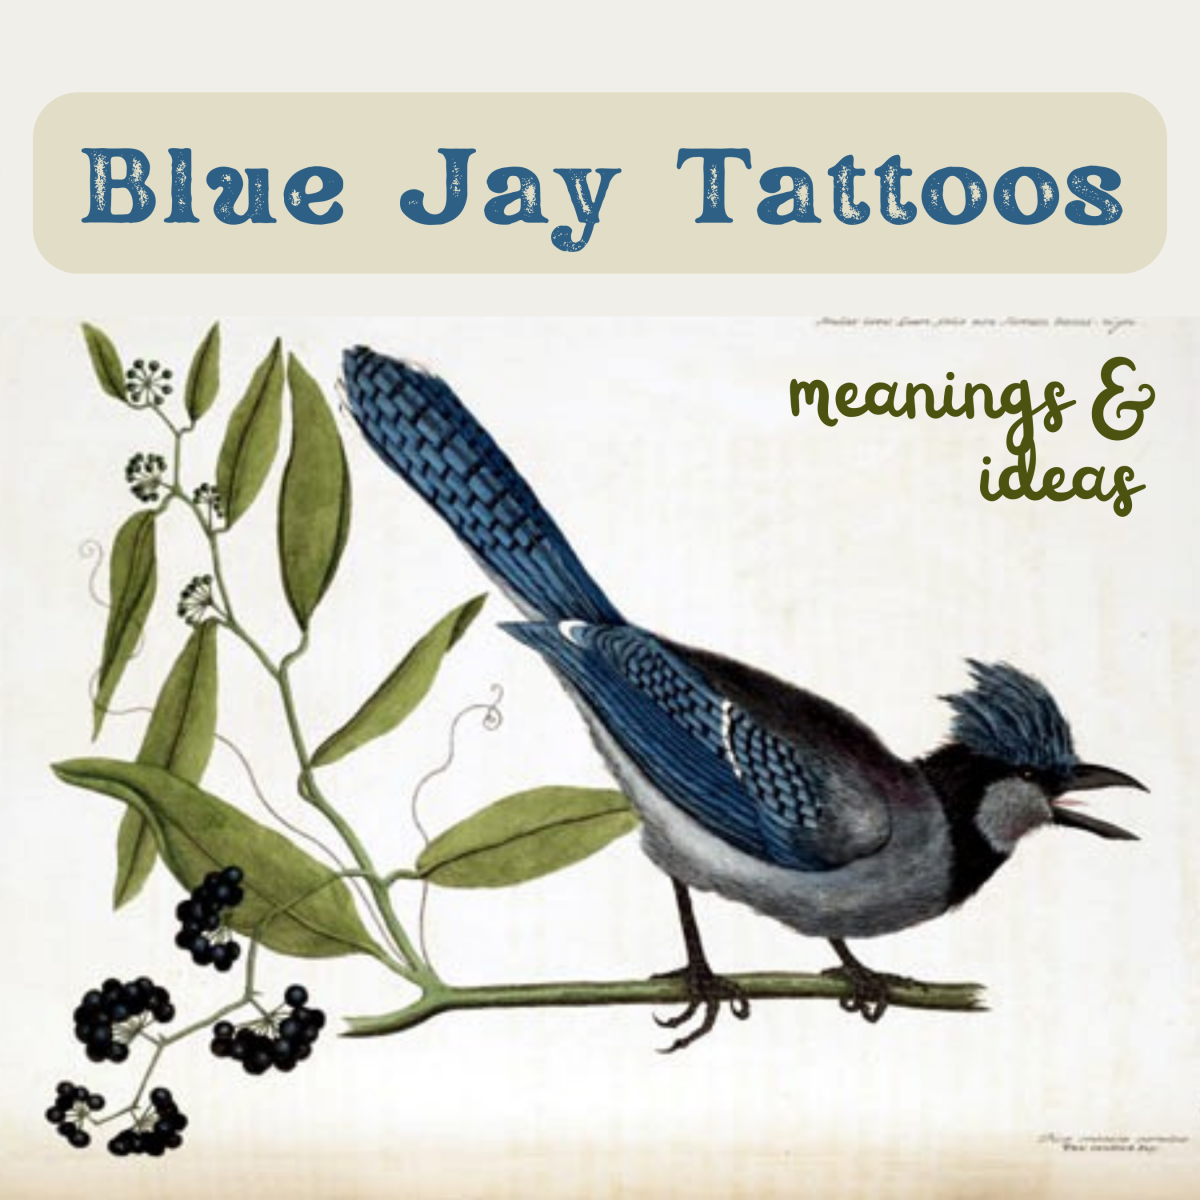 Blue Jay Tattoo Meanings & Designs